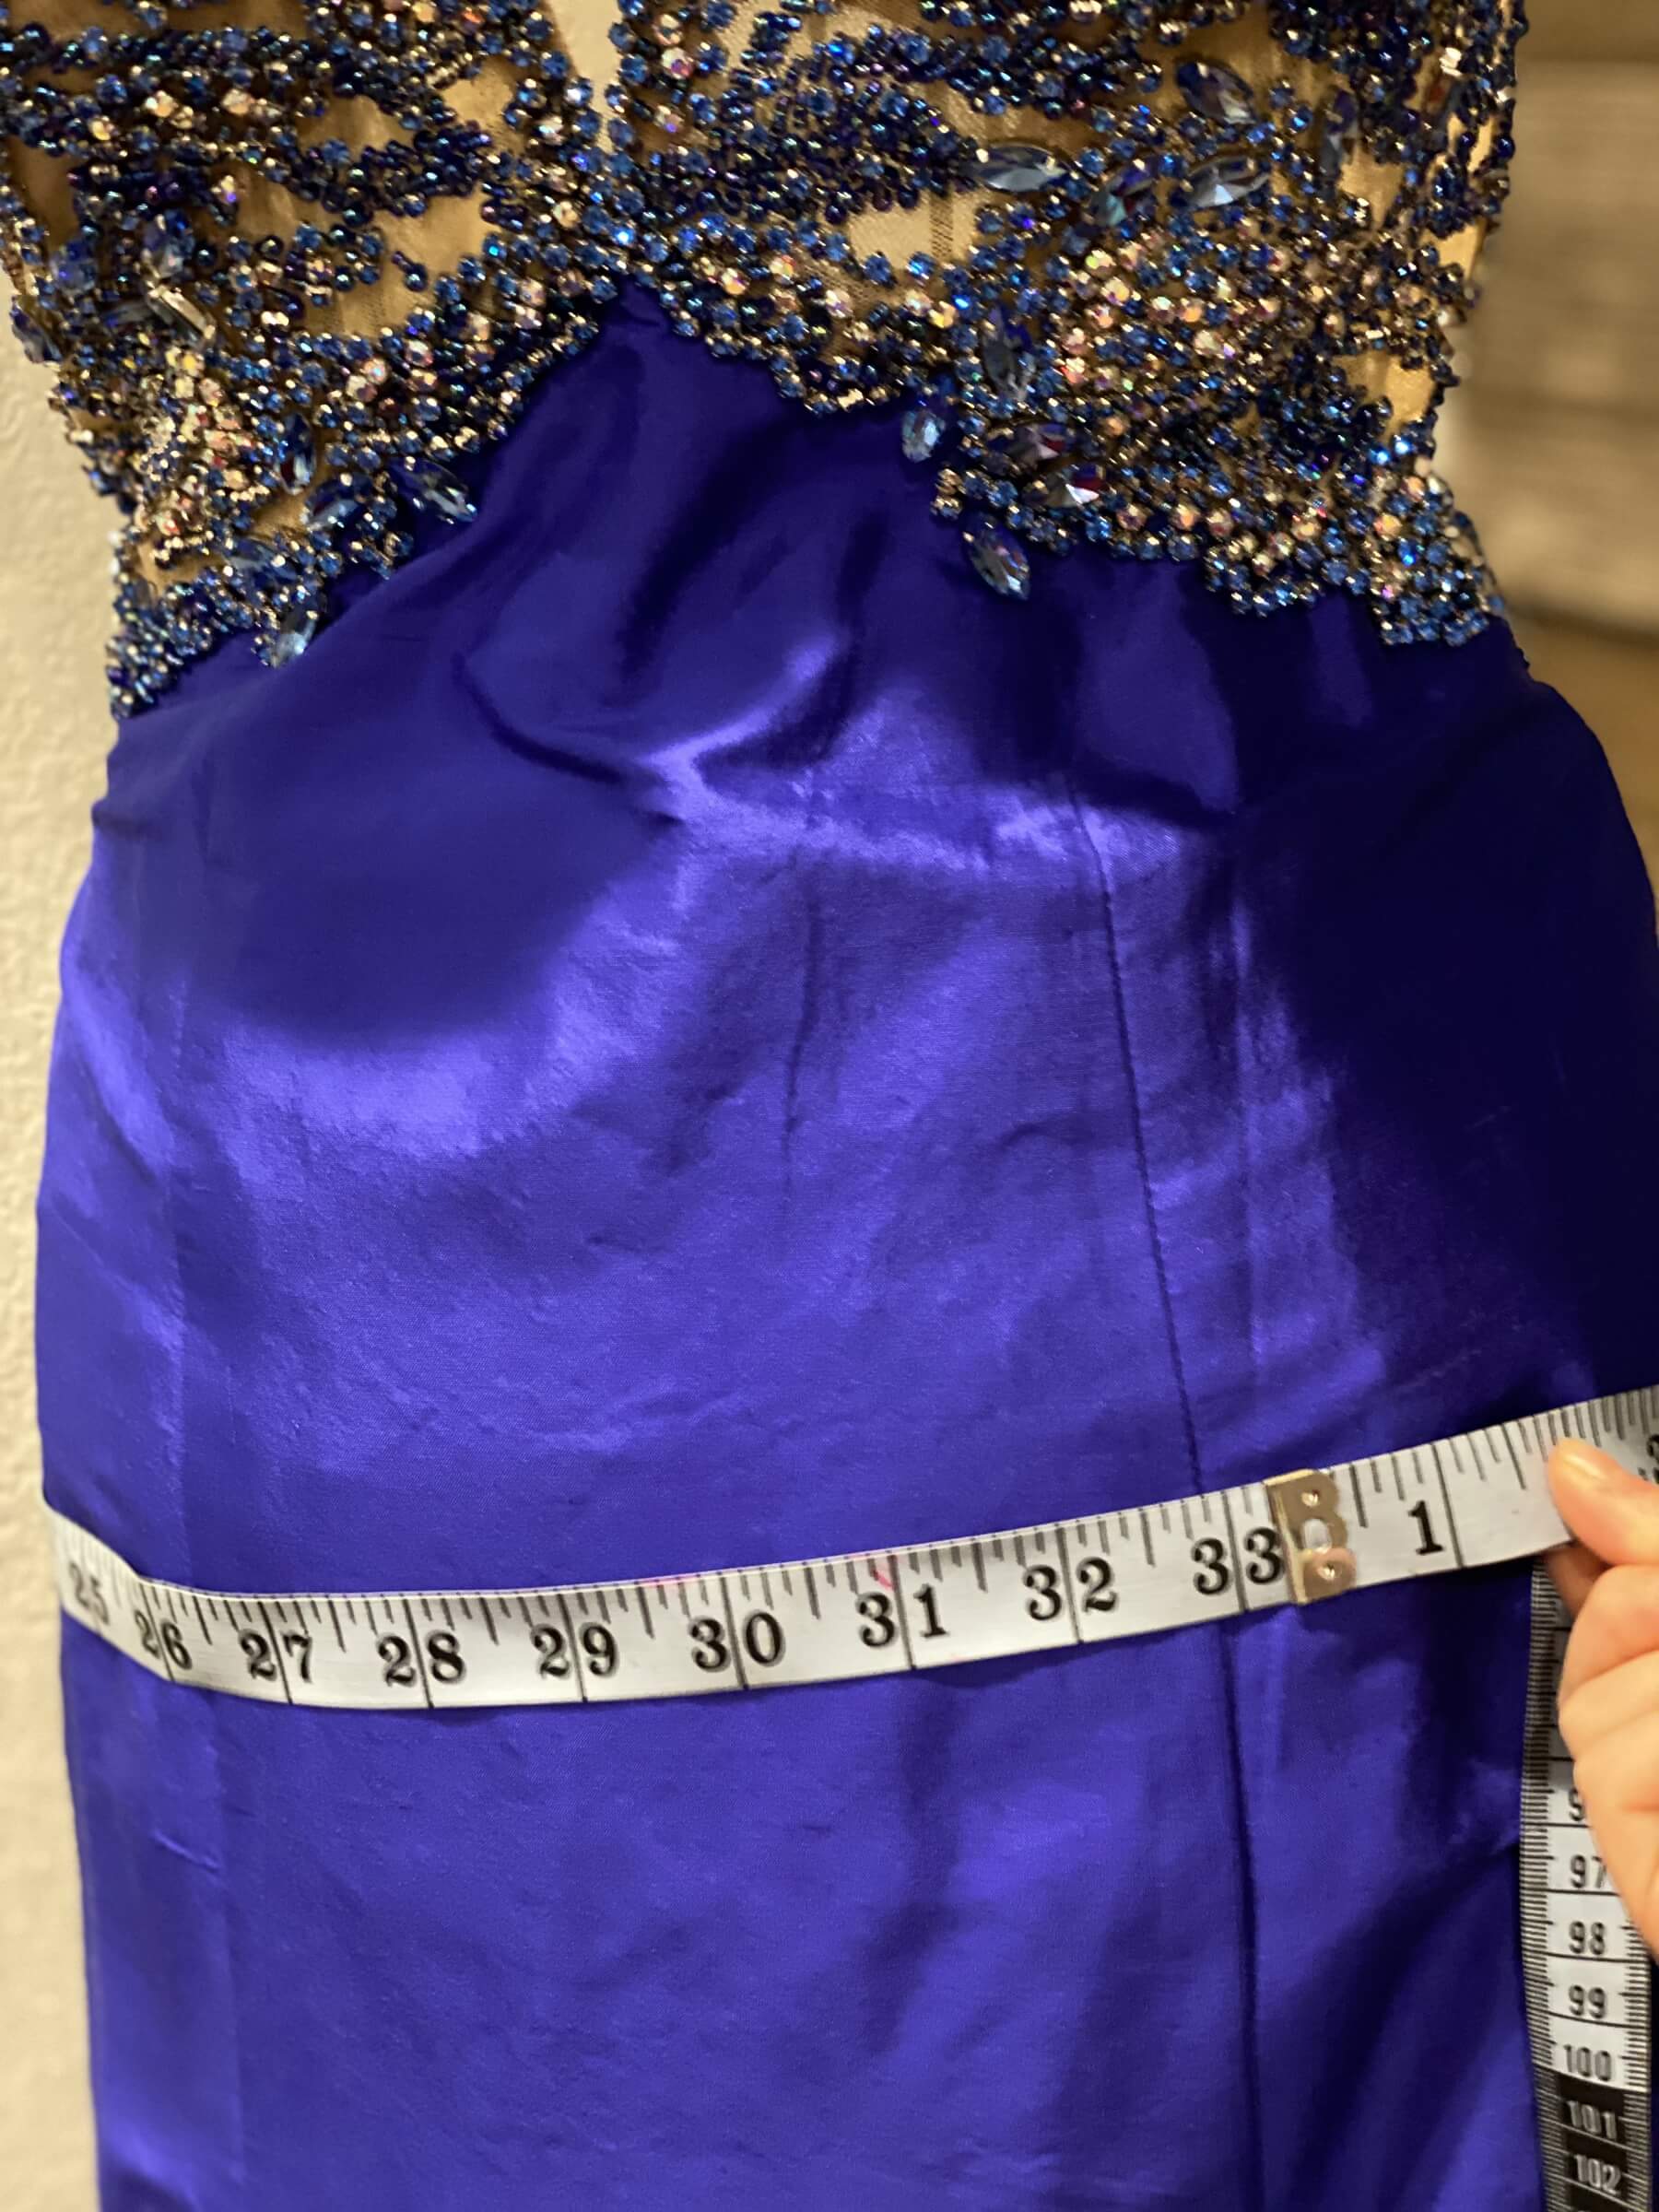 Sherri Hill Size 2 Prom Plunge Sequined Royal Blue Side Slit Dress on Queenly